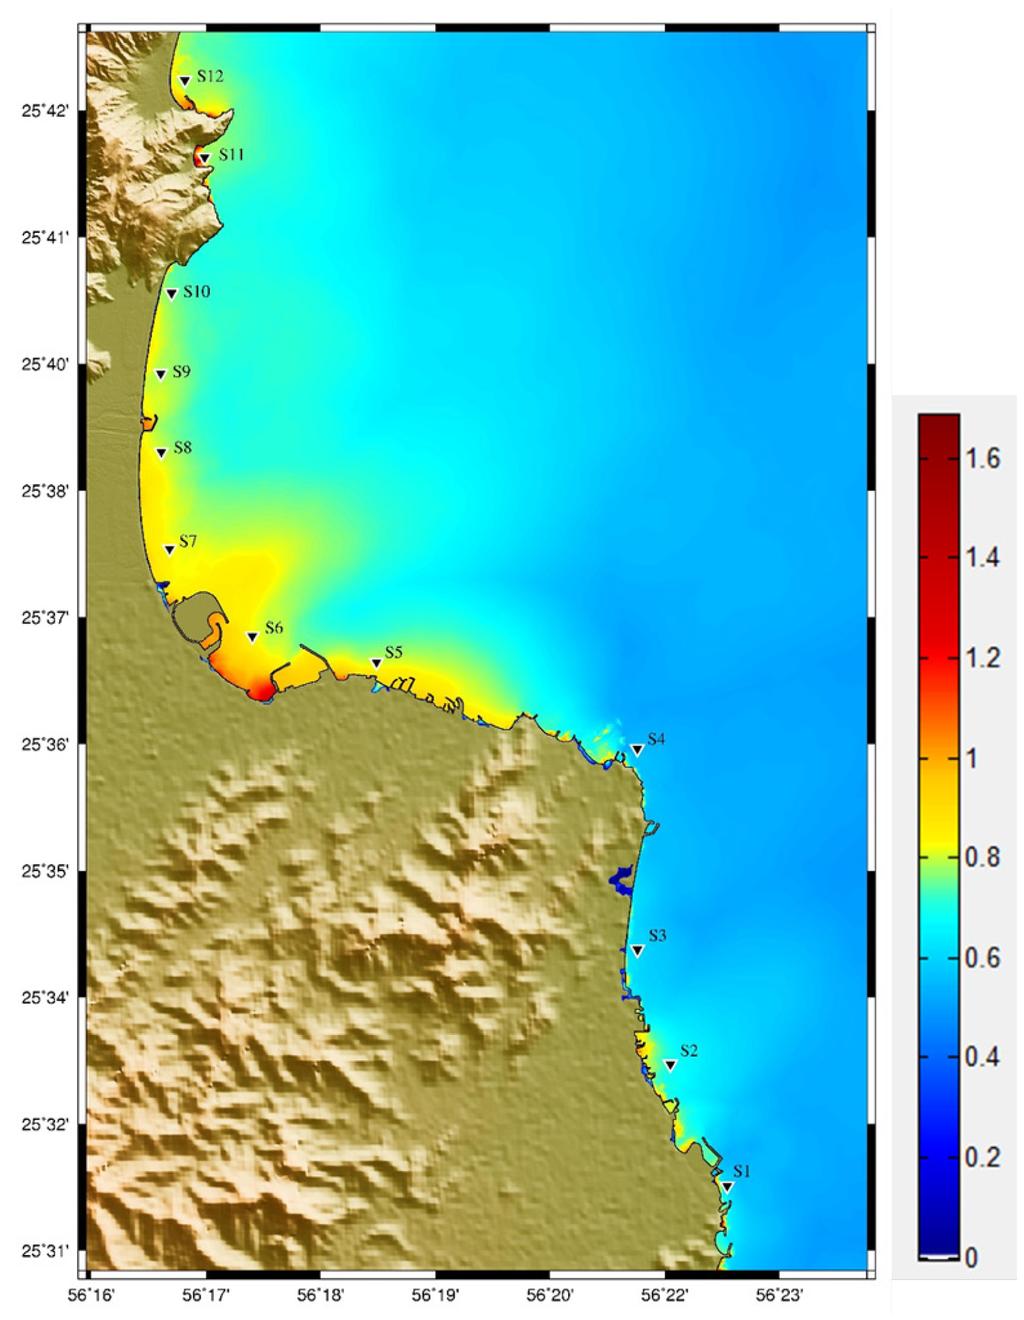 Fig. 6. Tsunami hazard map for Diba Oman with 5m grid spacing representing maximum wave height and inundation in meters for Scenario One M w 8.